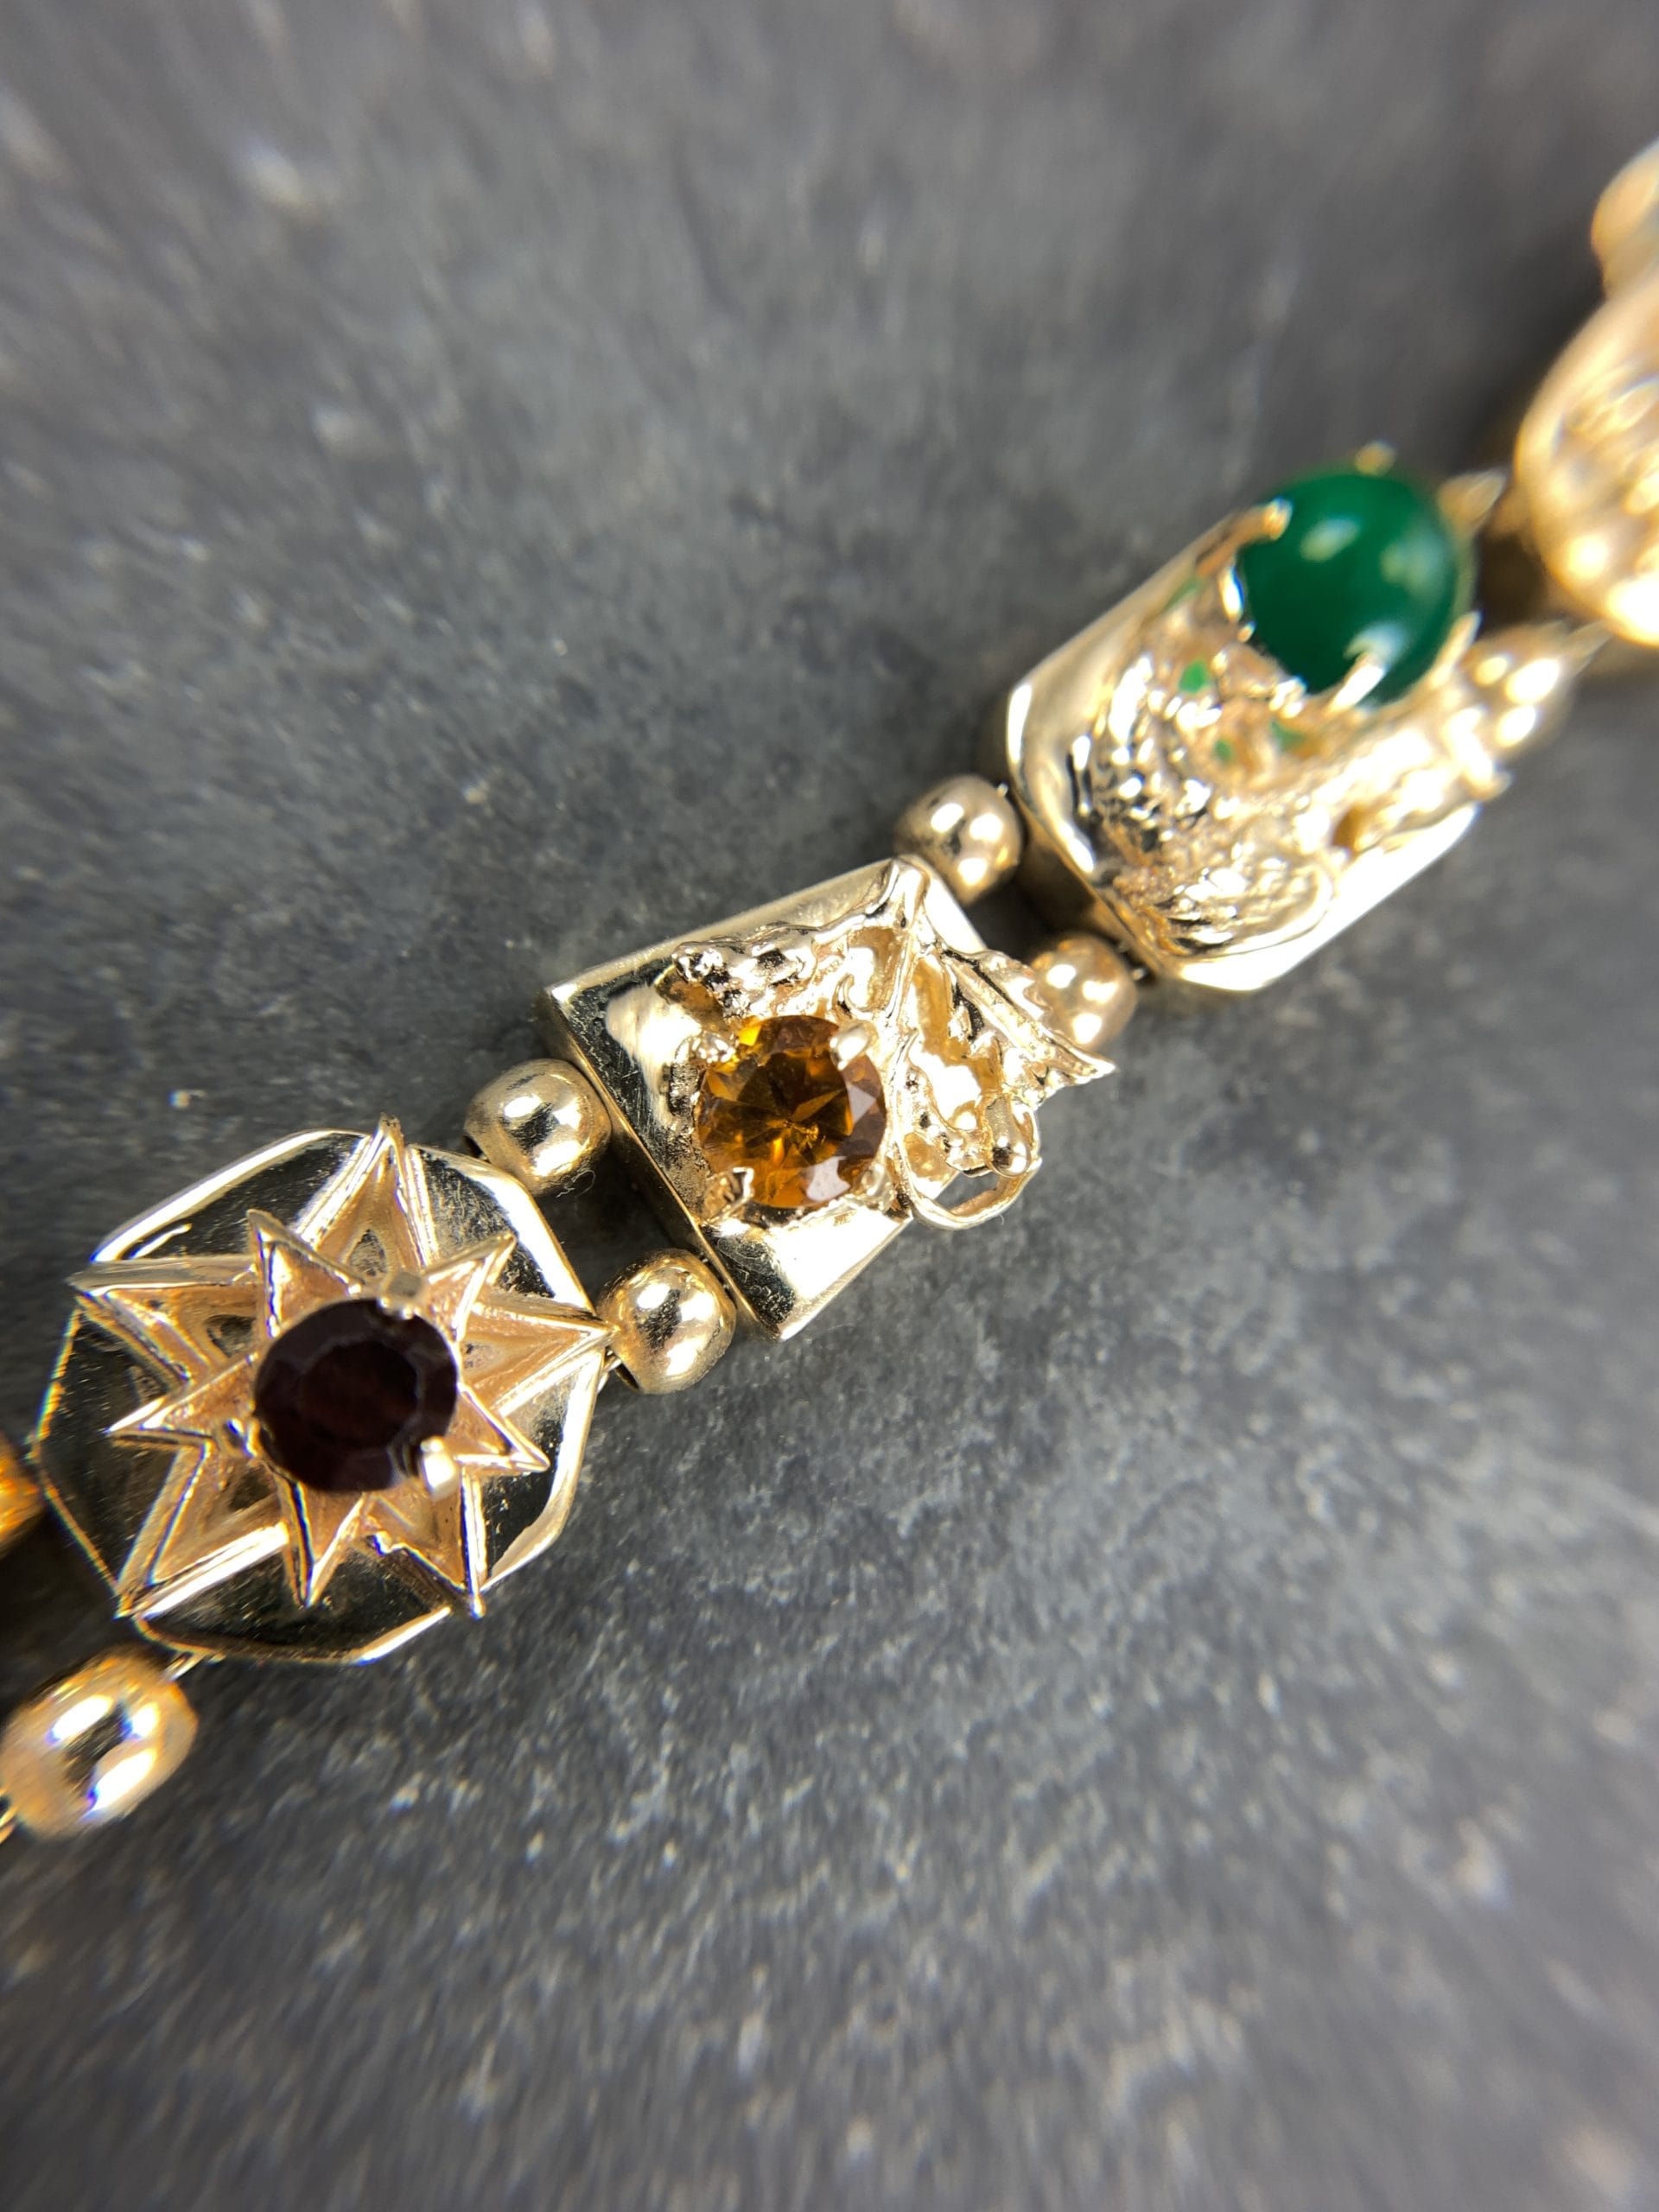 Summit in Multi Bracelet - Webster MO Stone (A2486) 7821 Vintage | Blvd. and Gold Bend | 14k Big Yellow | 63119 Groves, Enamel Gems Jewelers with Artistic